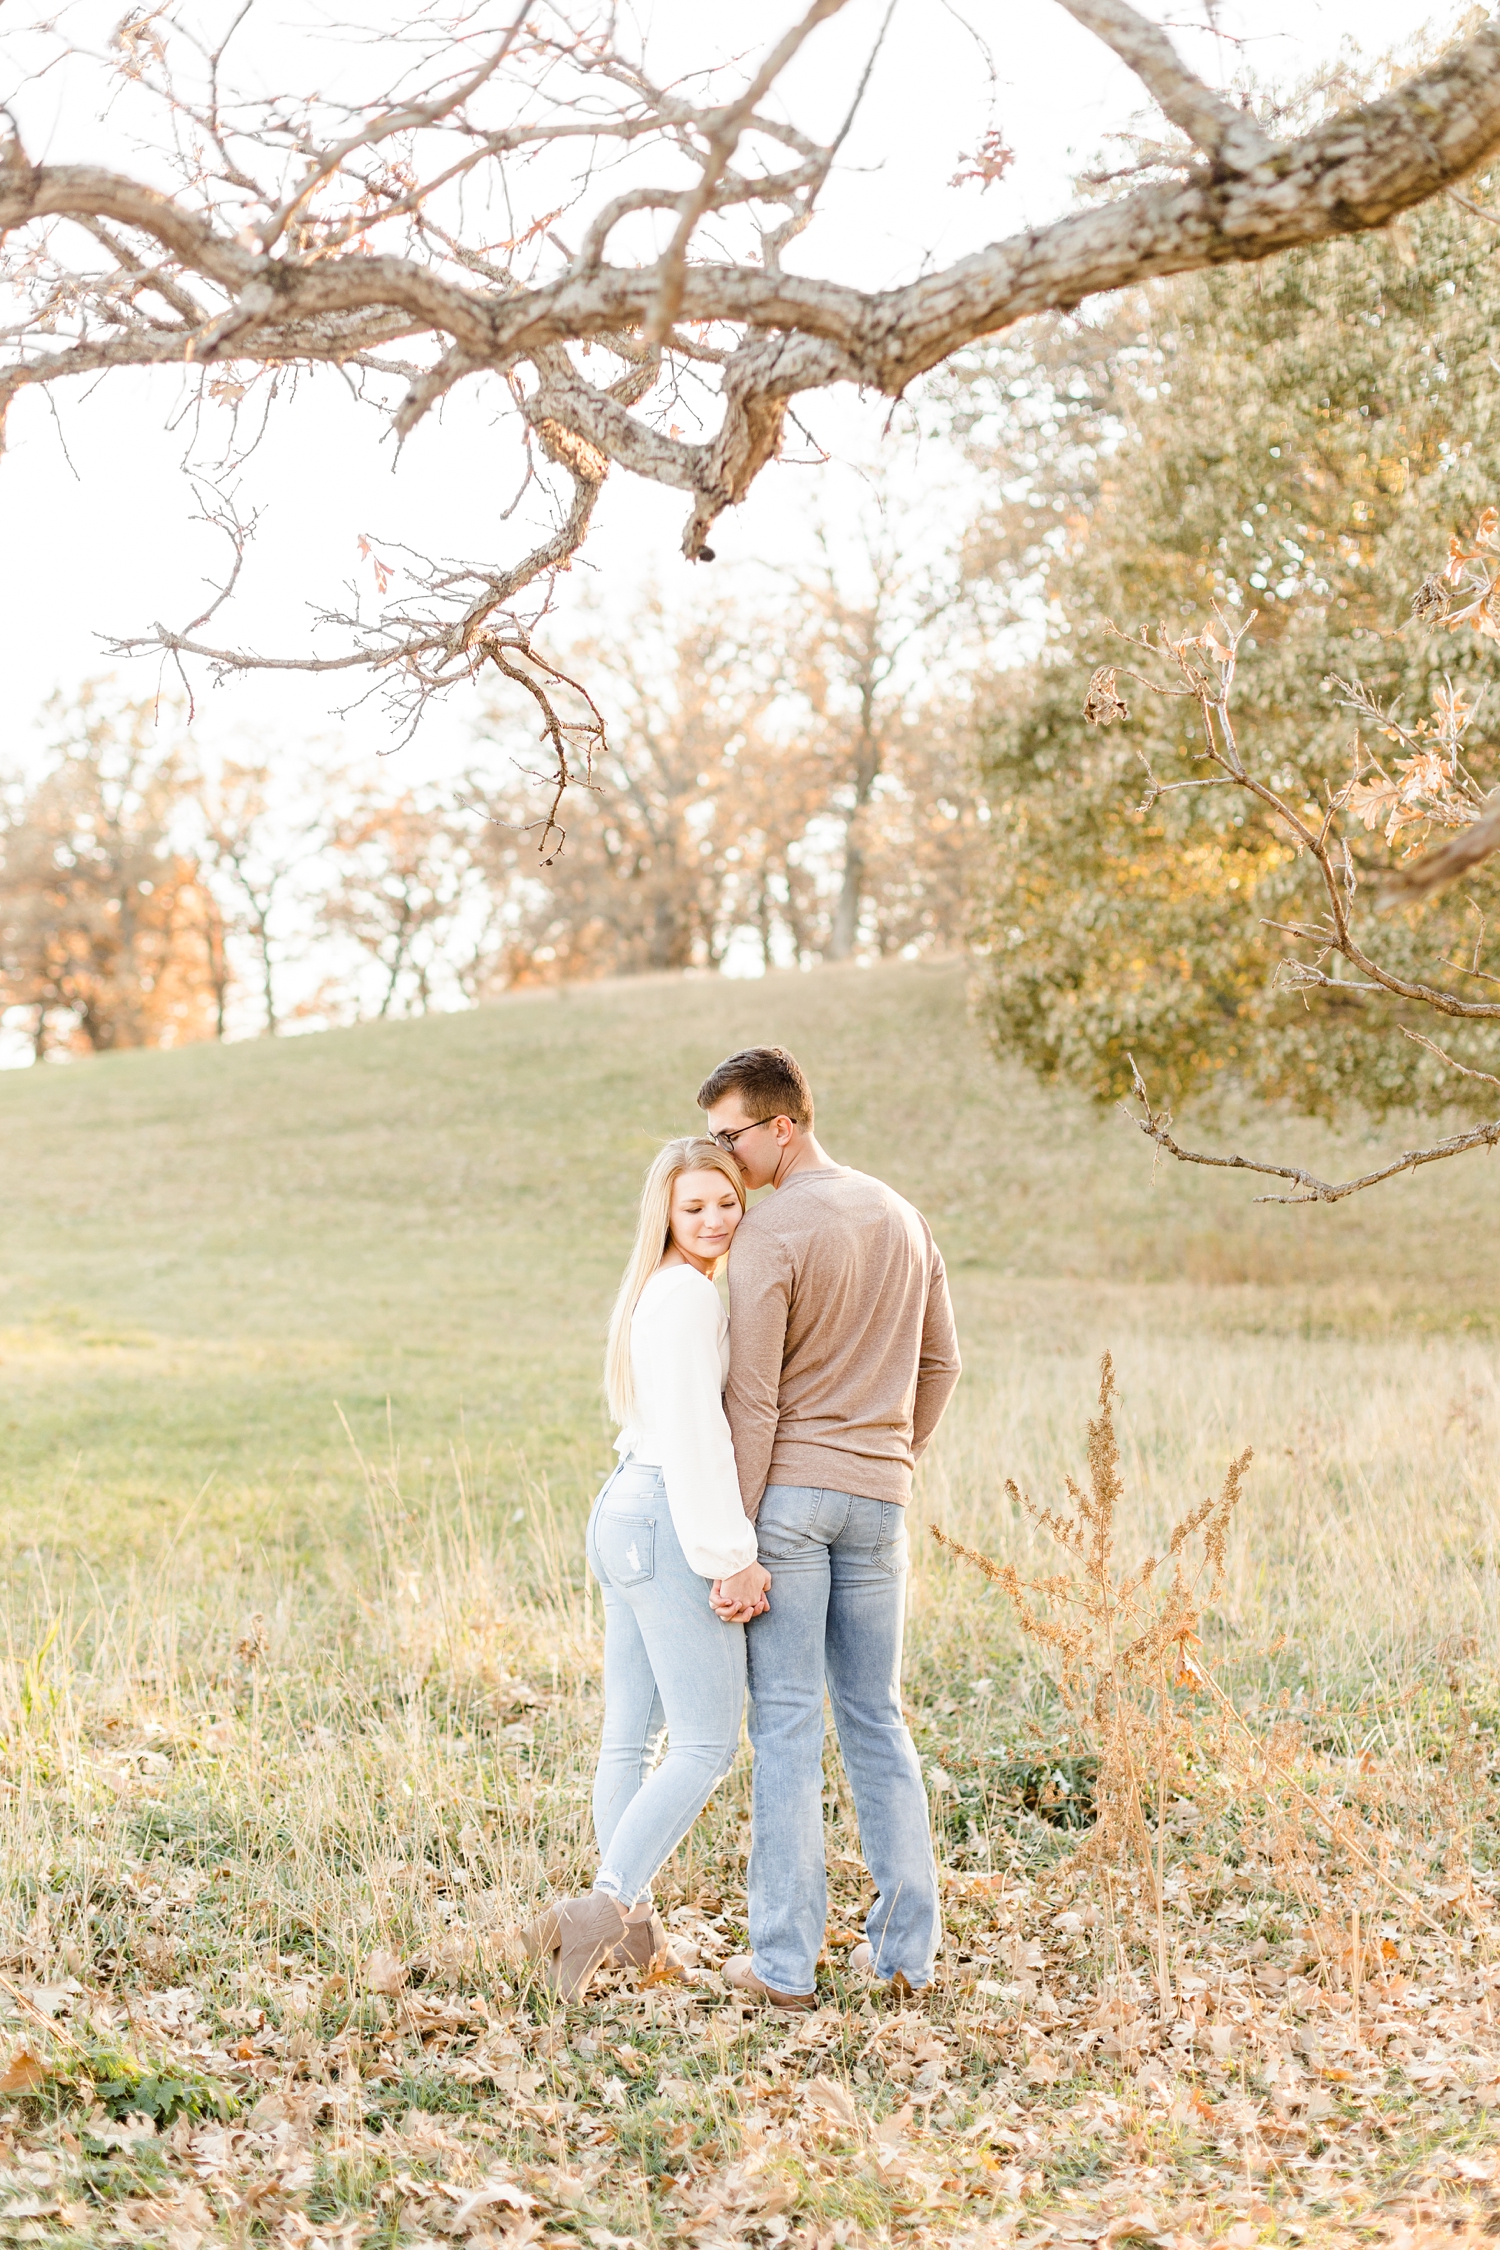 Quinton nuzzles Alli while standing and holding hands in a grassy pasture full of leaves | CB Studio